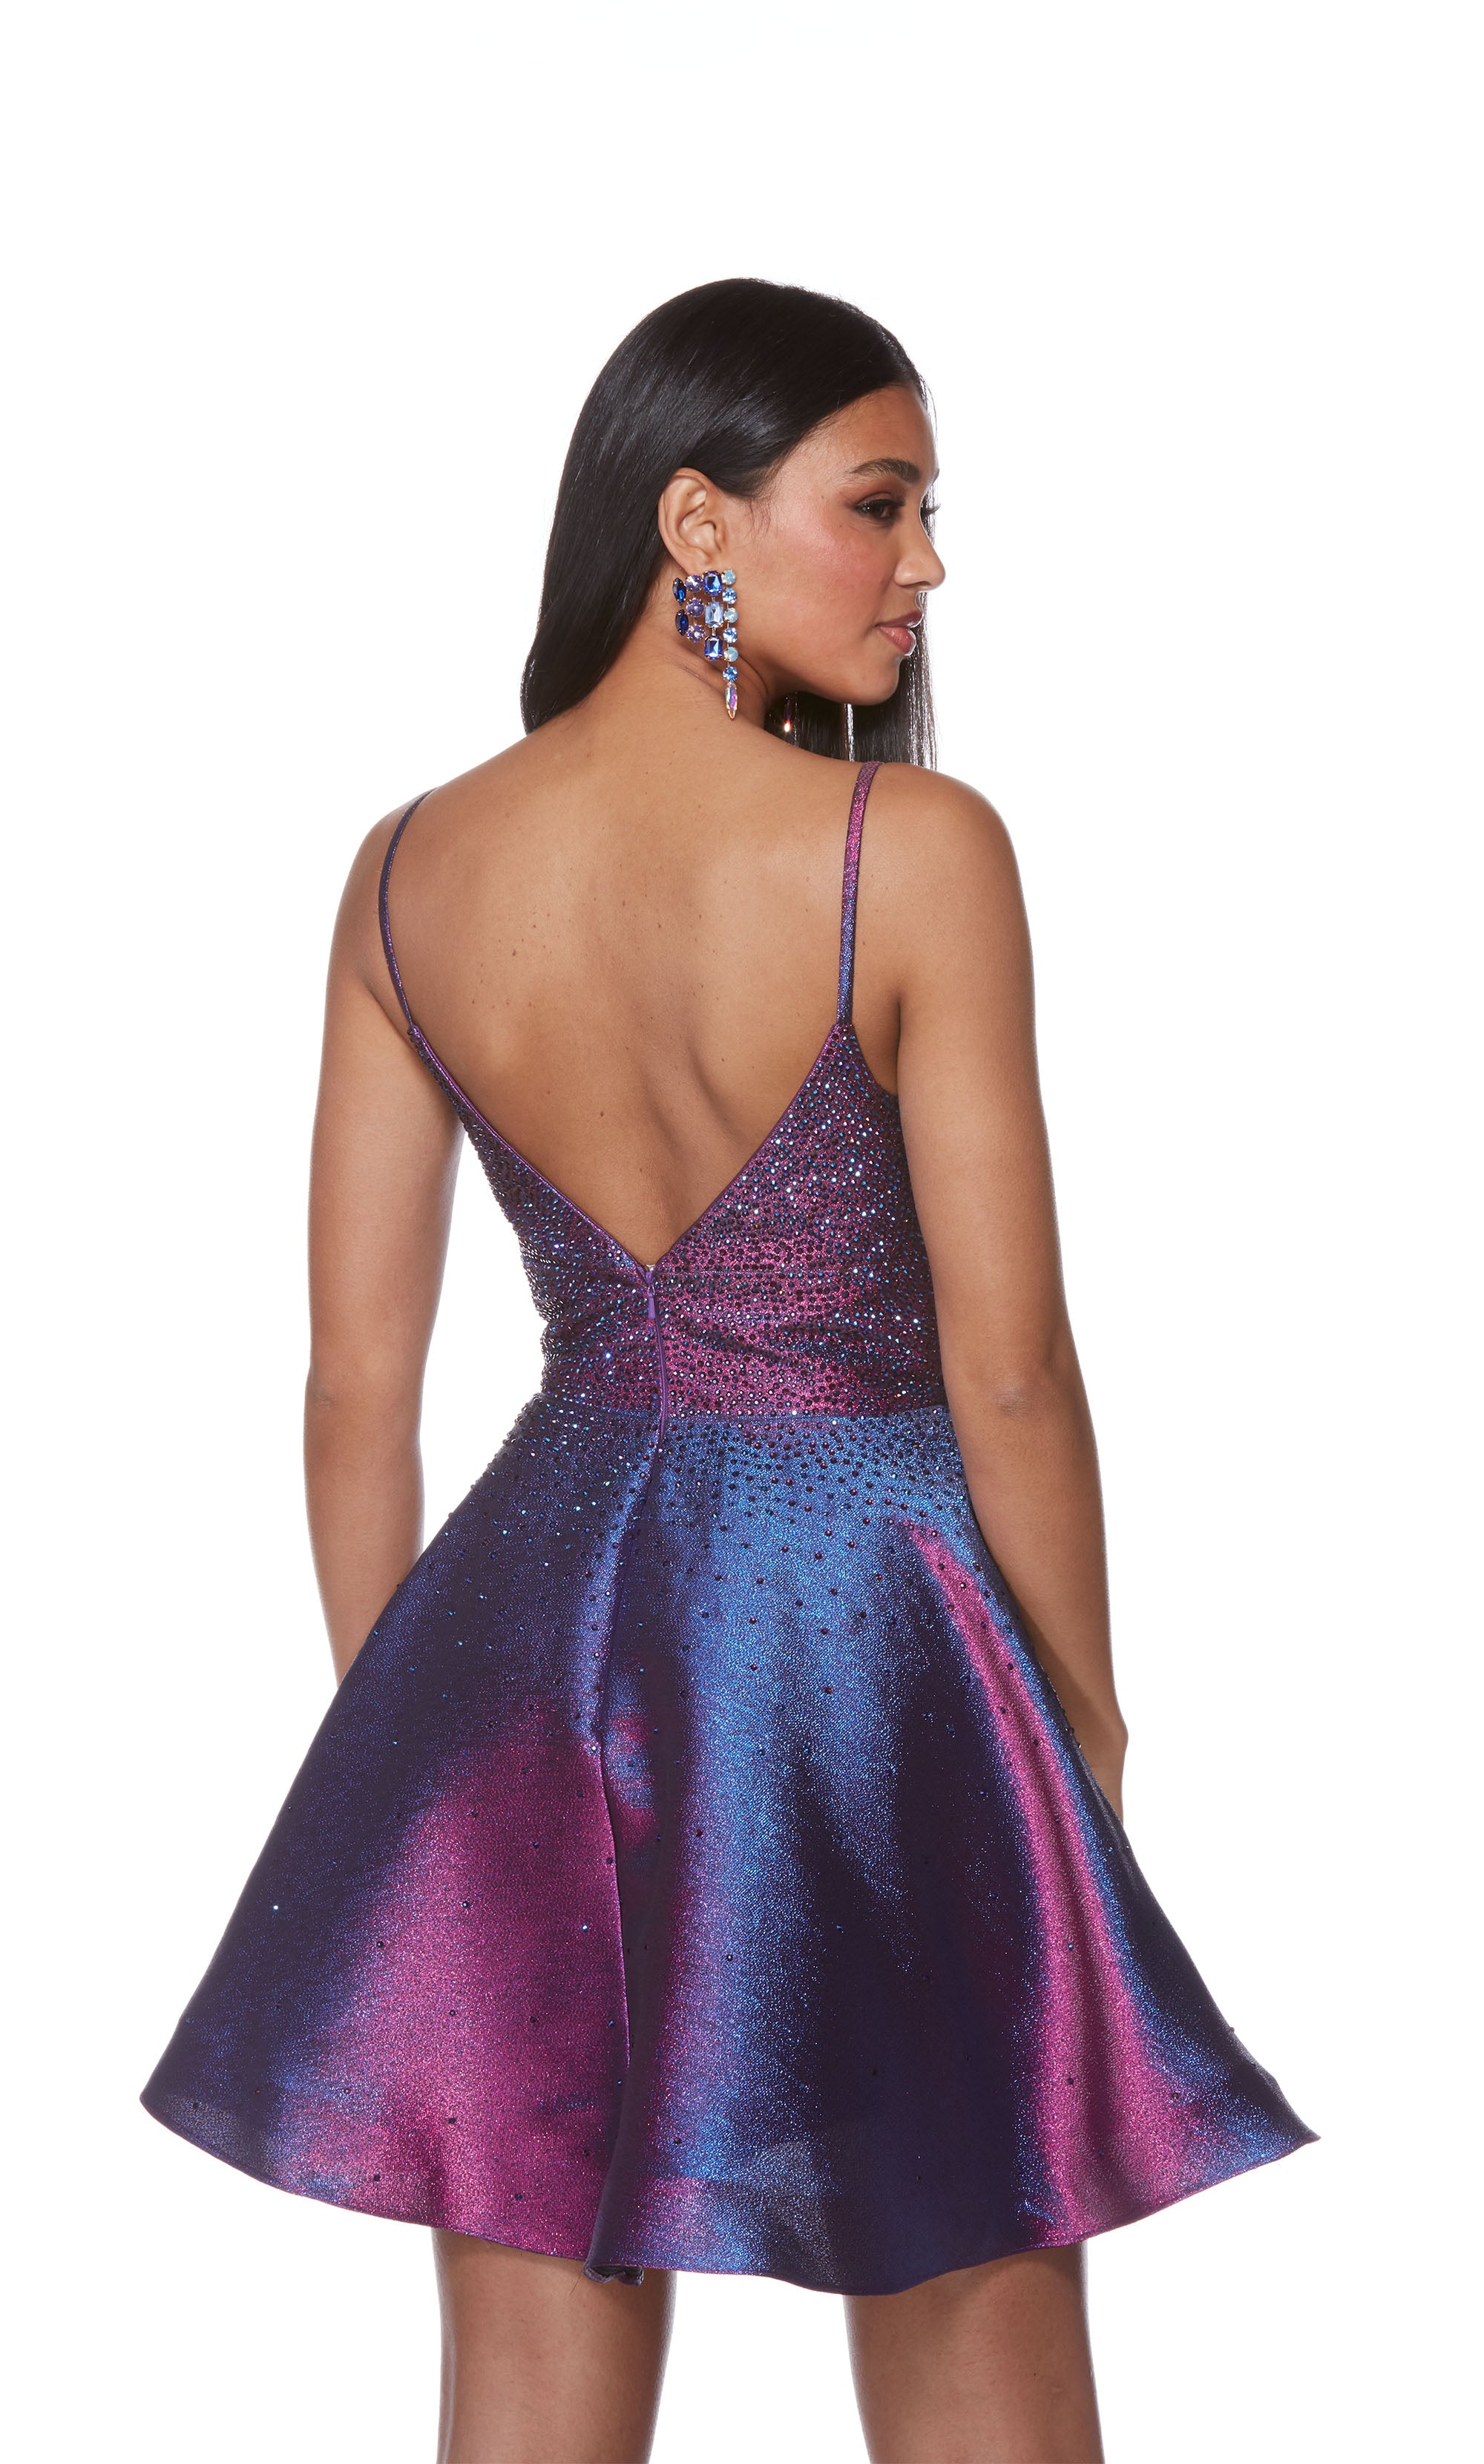 A sparkly metallic short homecoming dress boasting a plunging neckline, jewel embellished bodice, and a flirty flared skirt. The color is an iridescent blue-ish purple called blueberry.